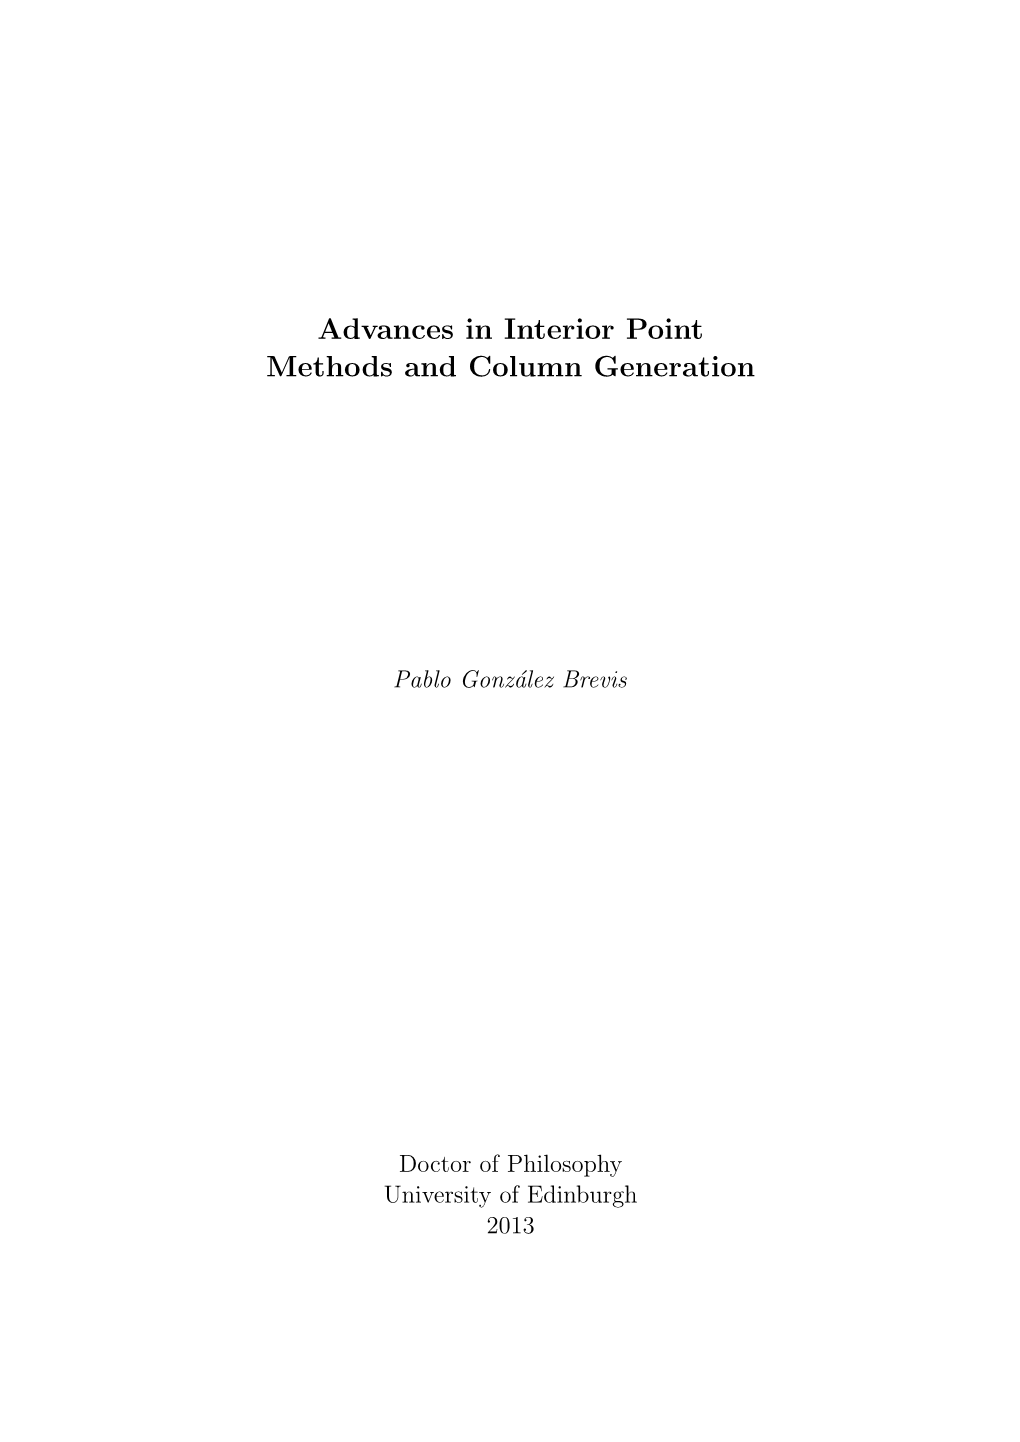 Advances in Interior Point Methods and Column Generation